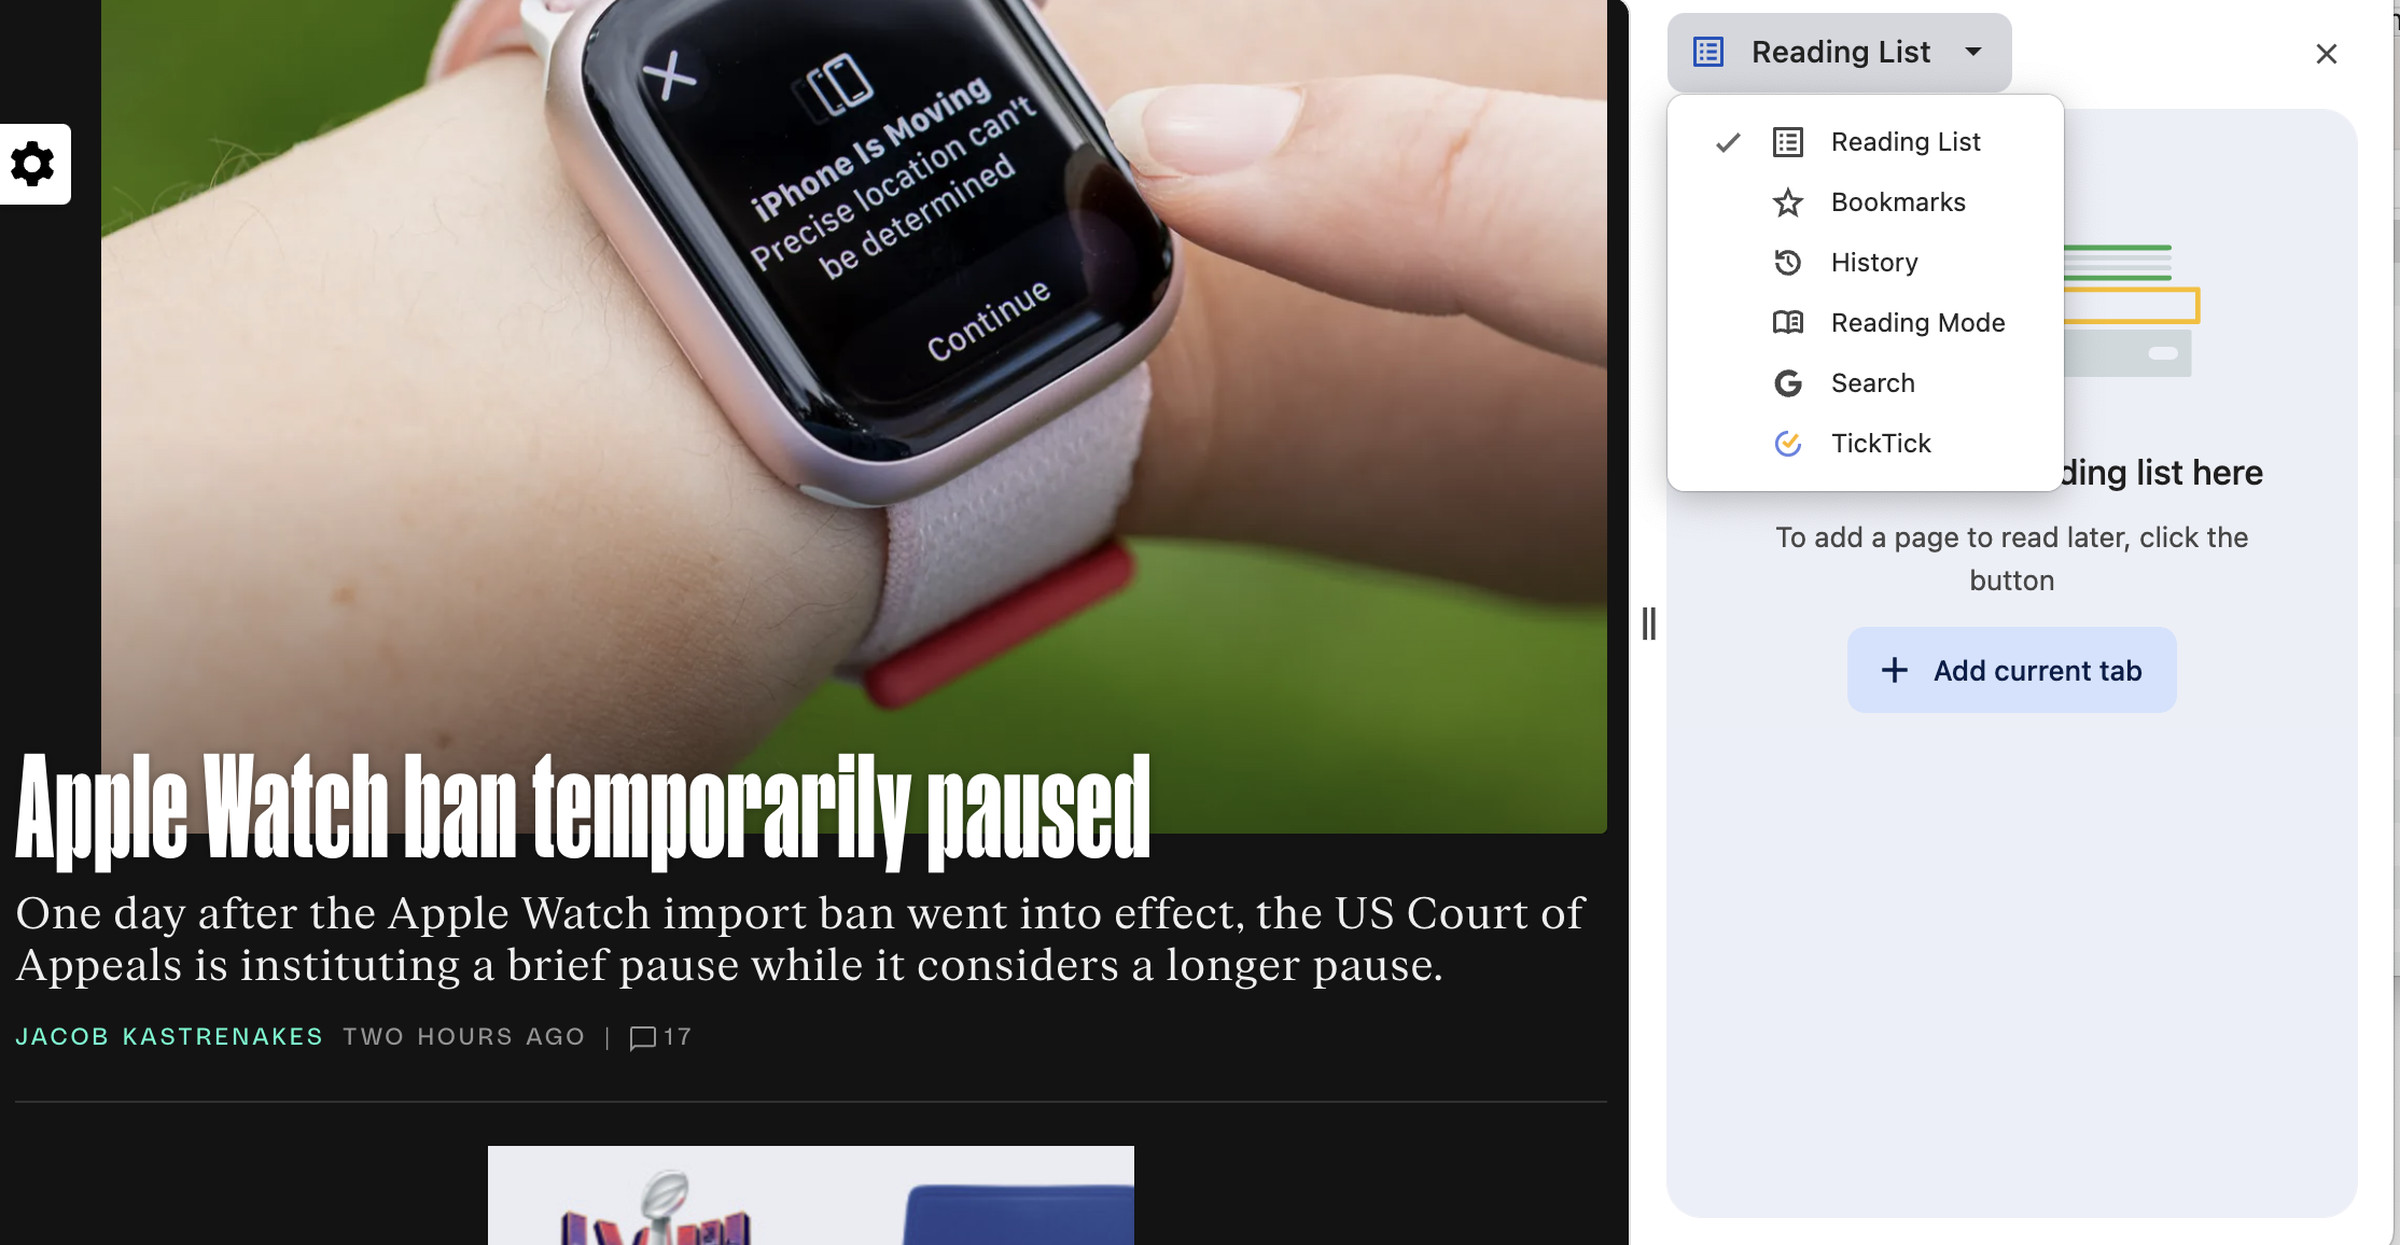 Chrome page with The Ver page site on the left with the headline “Apple Watch ban temporarily paused” and a column on the right with a drop-down menu.